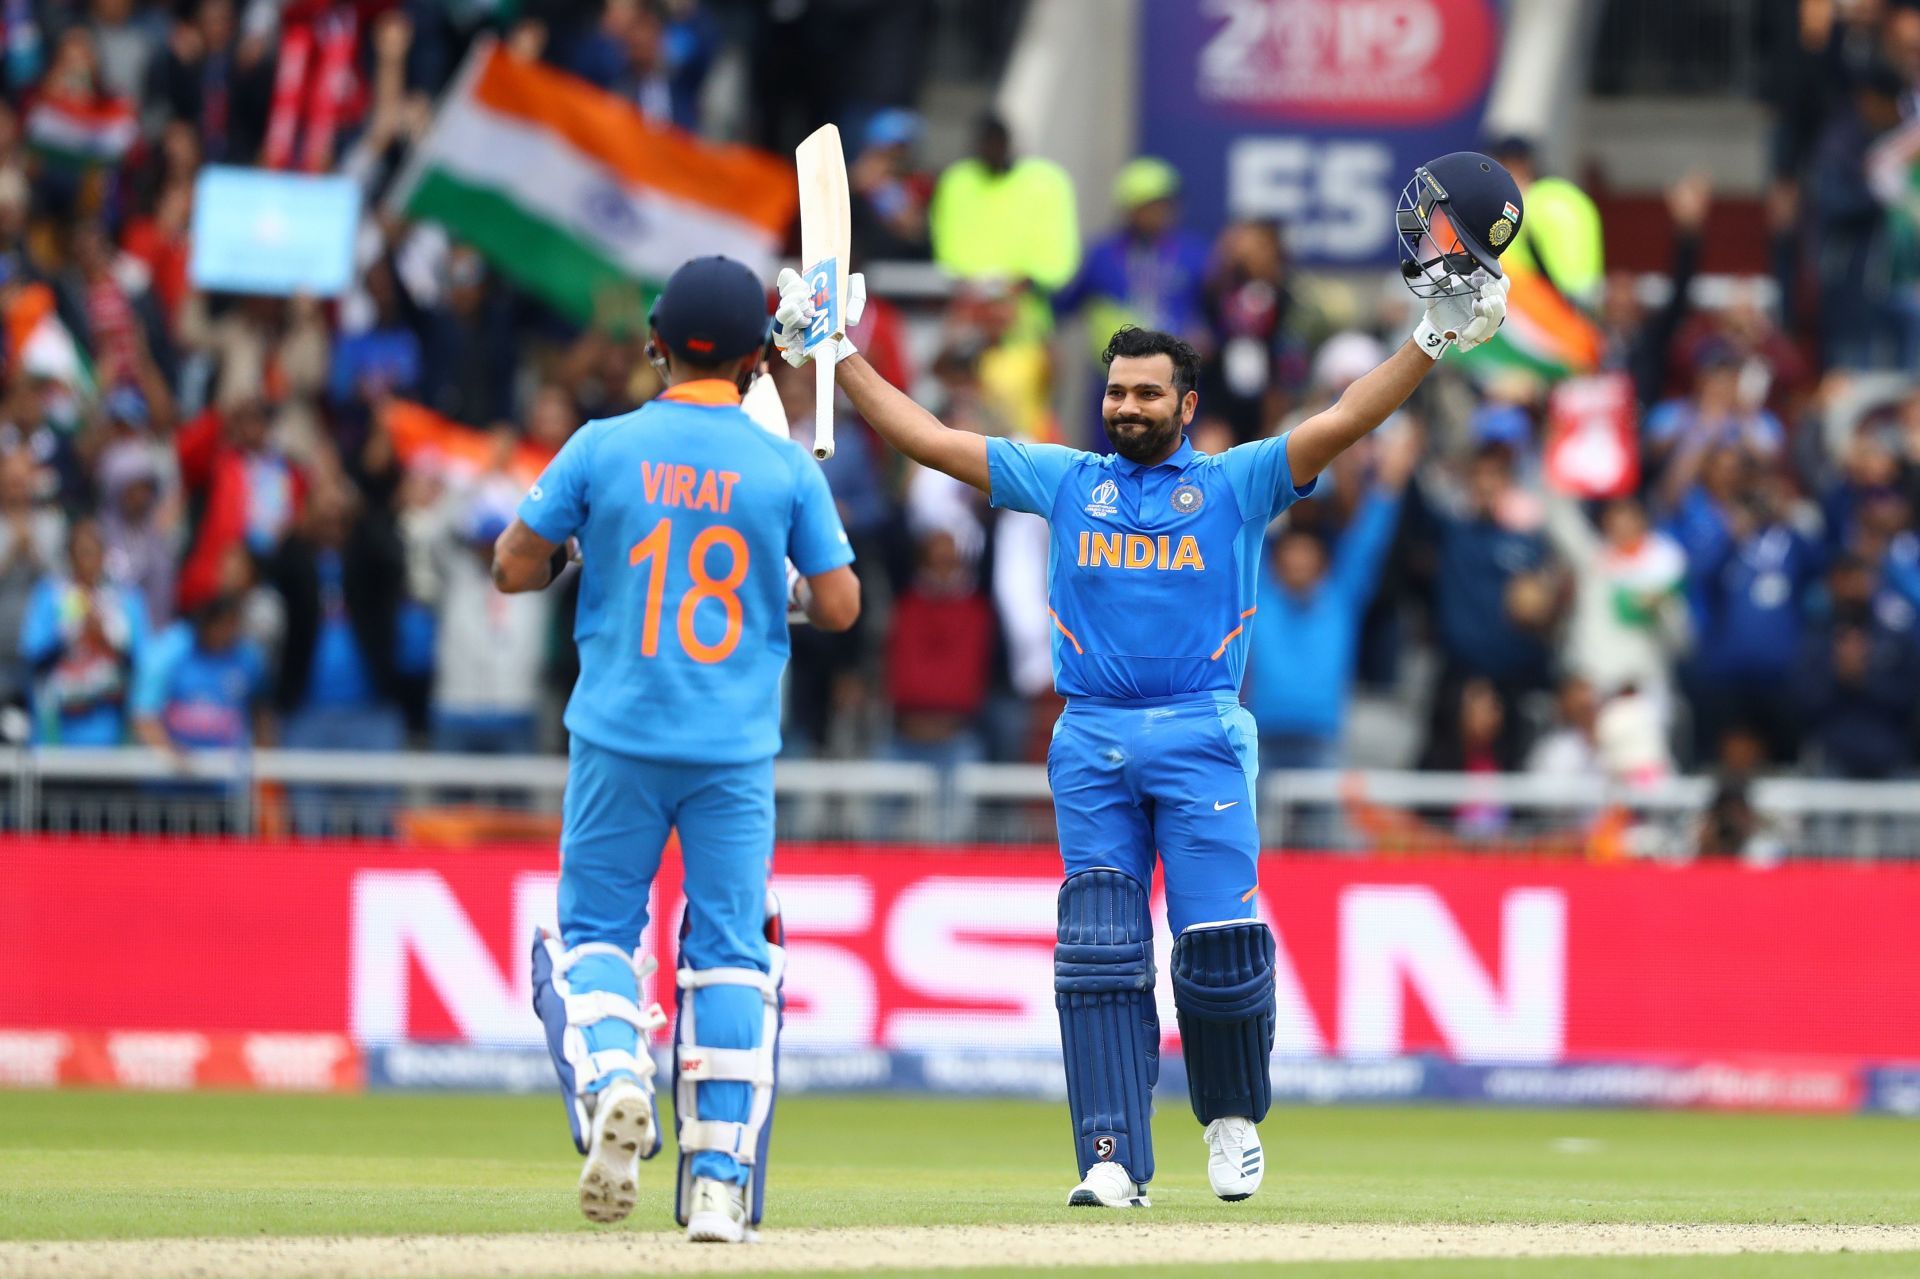 Rohit Sharma celebrates his hundred at the 2019 ODI World Cup [Getty Images]